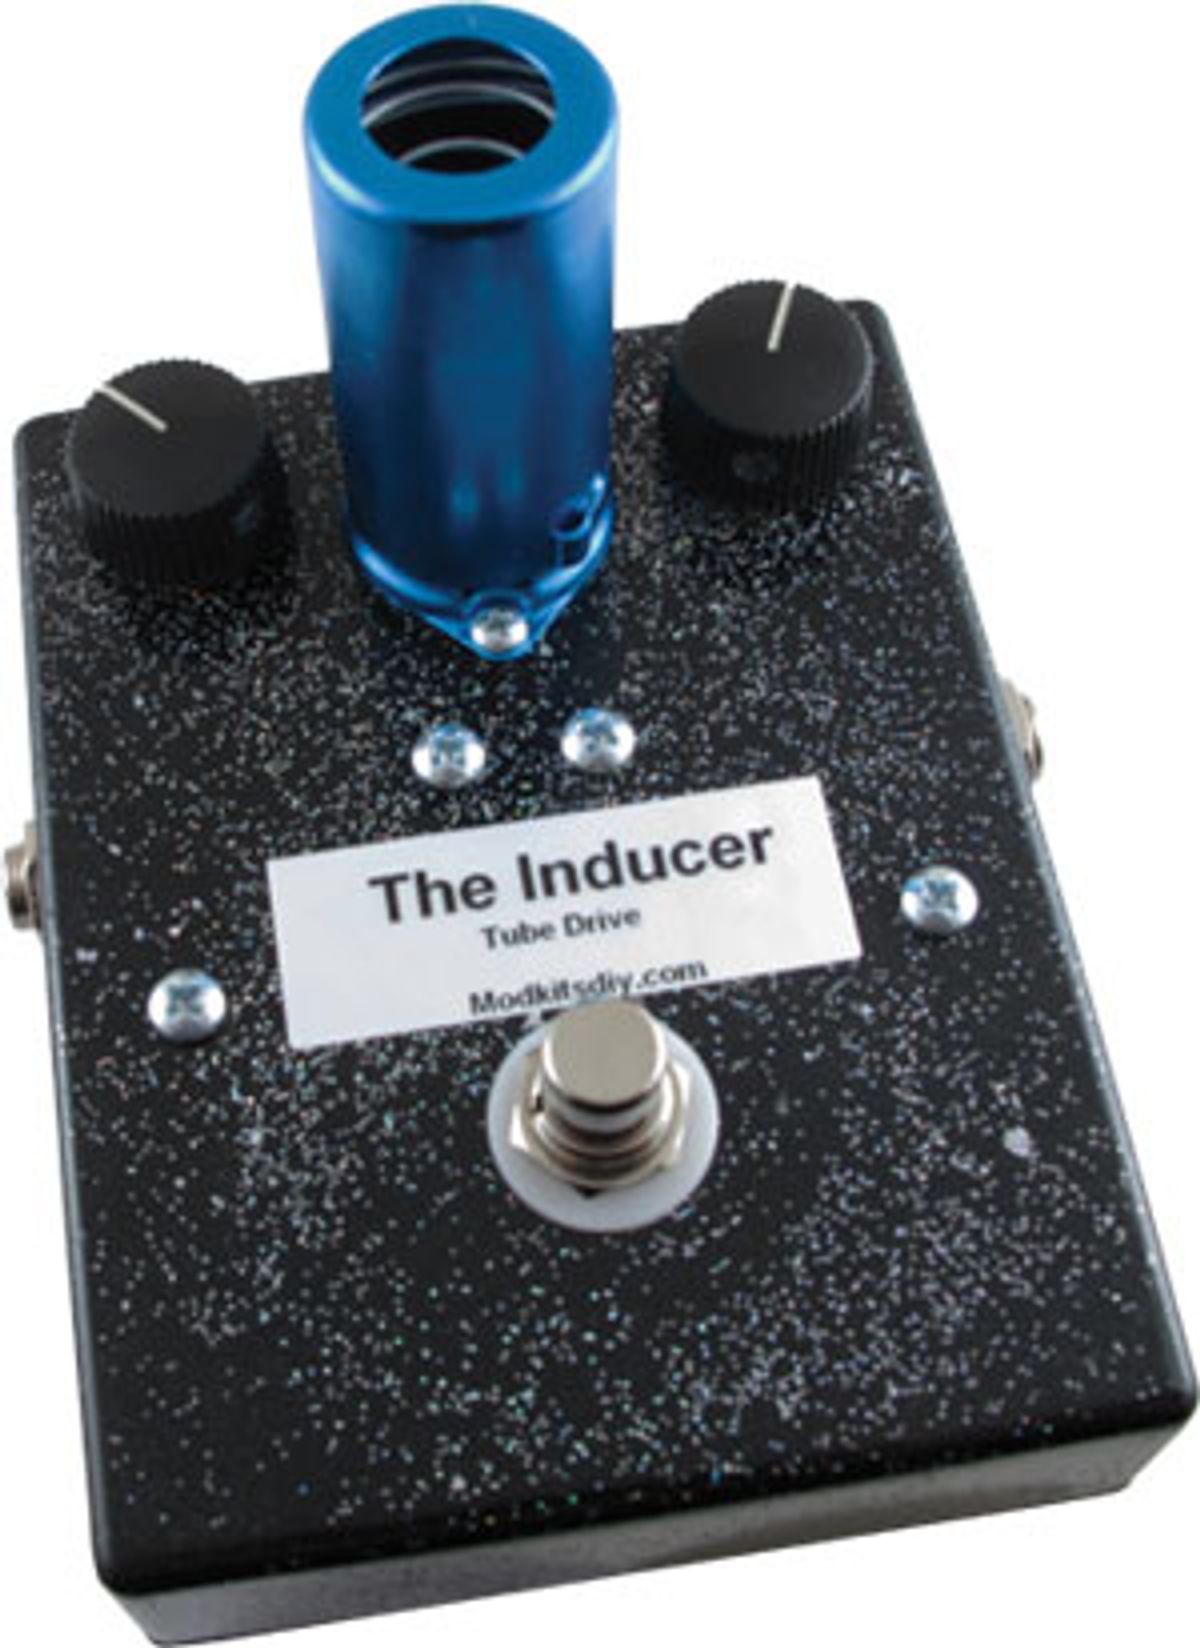 MOD Kits DIY Introduces the Limited Edition Inducer